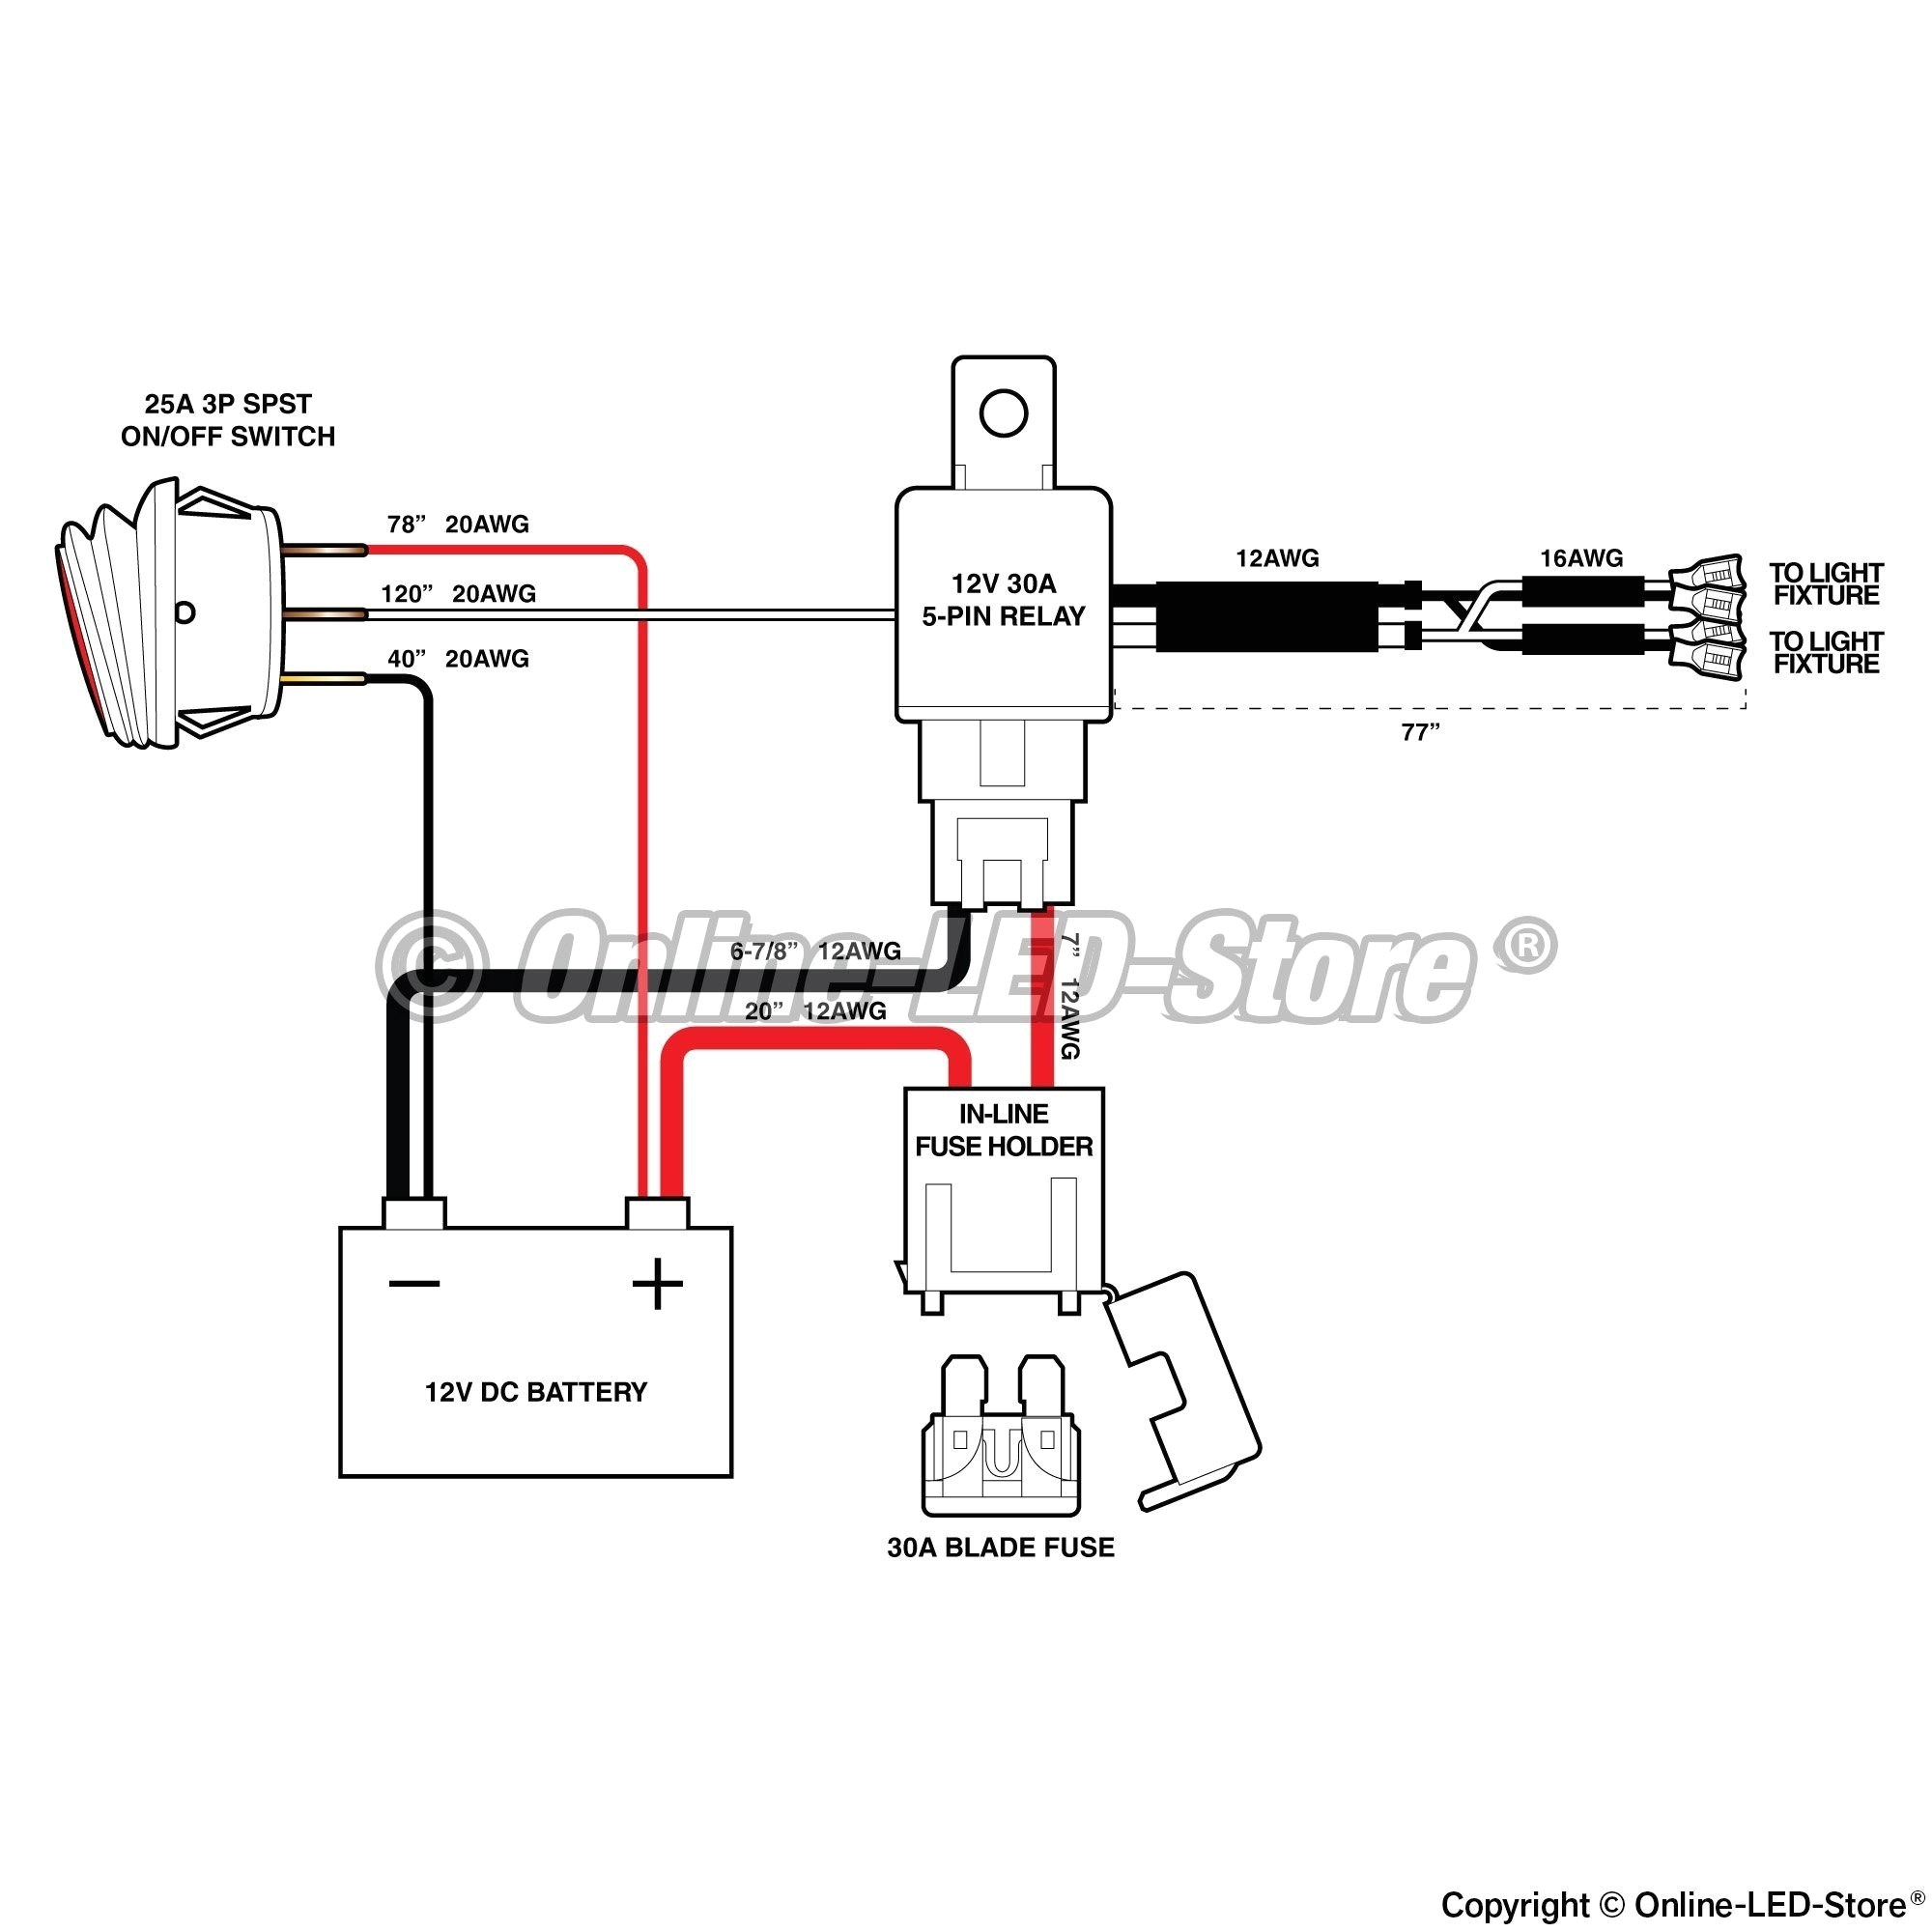 spst switch diagrams wiring diagram database toggle switch schematic wiring diagram